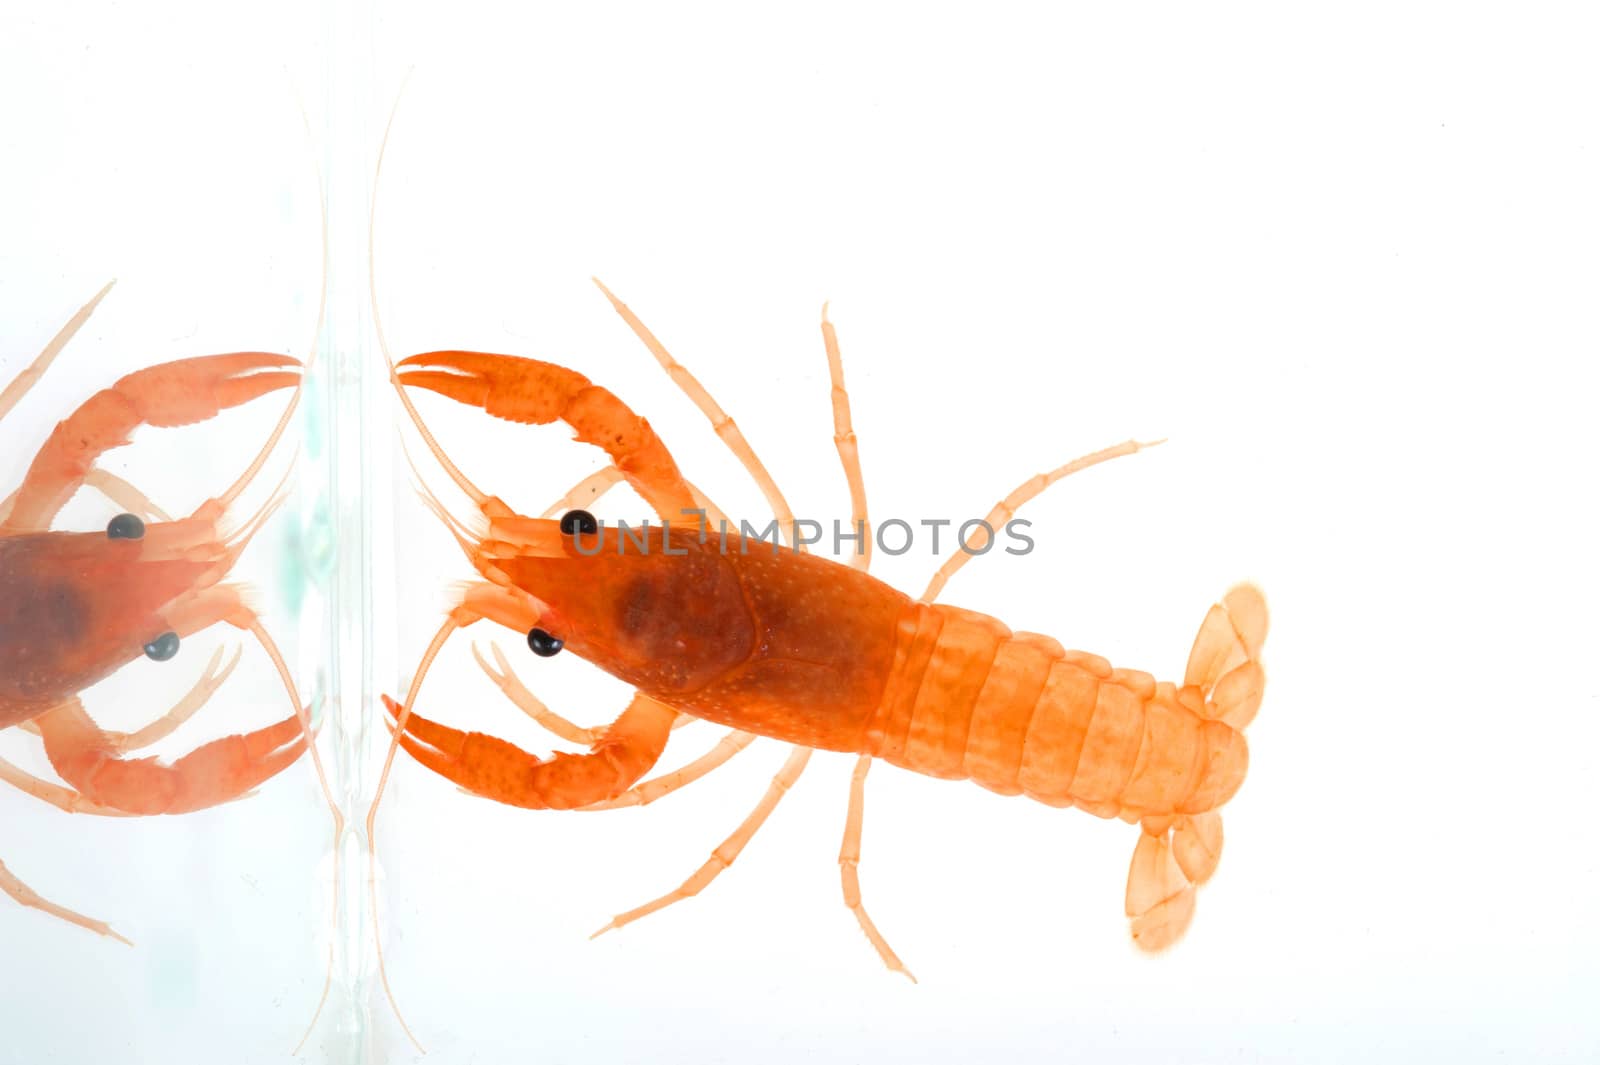 Freshwater crayfish by think4photop